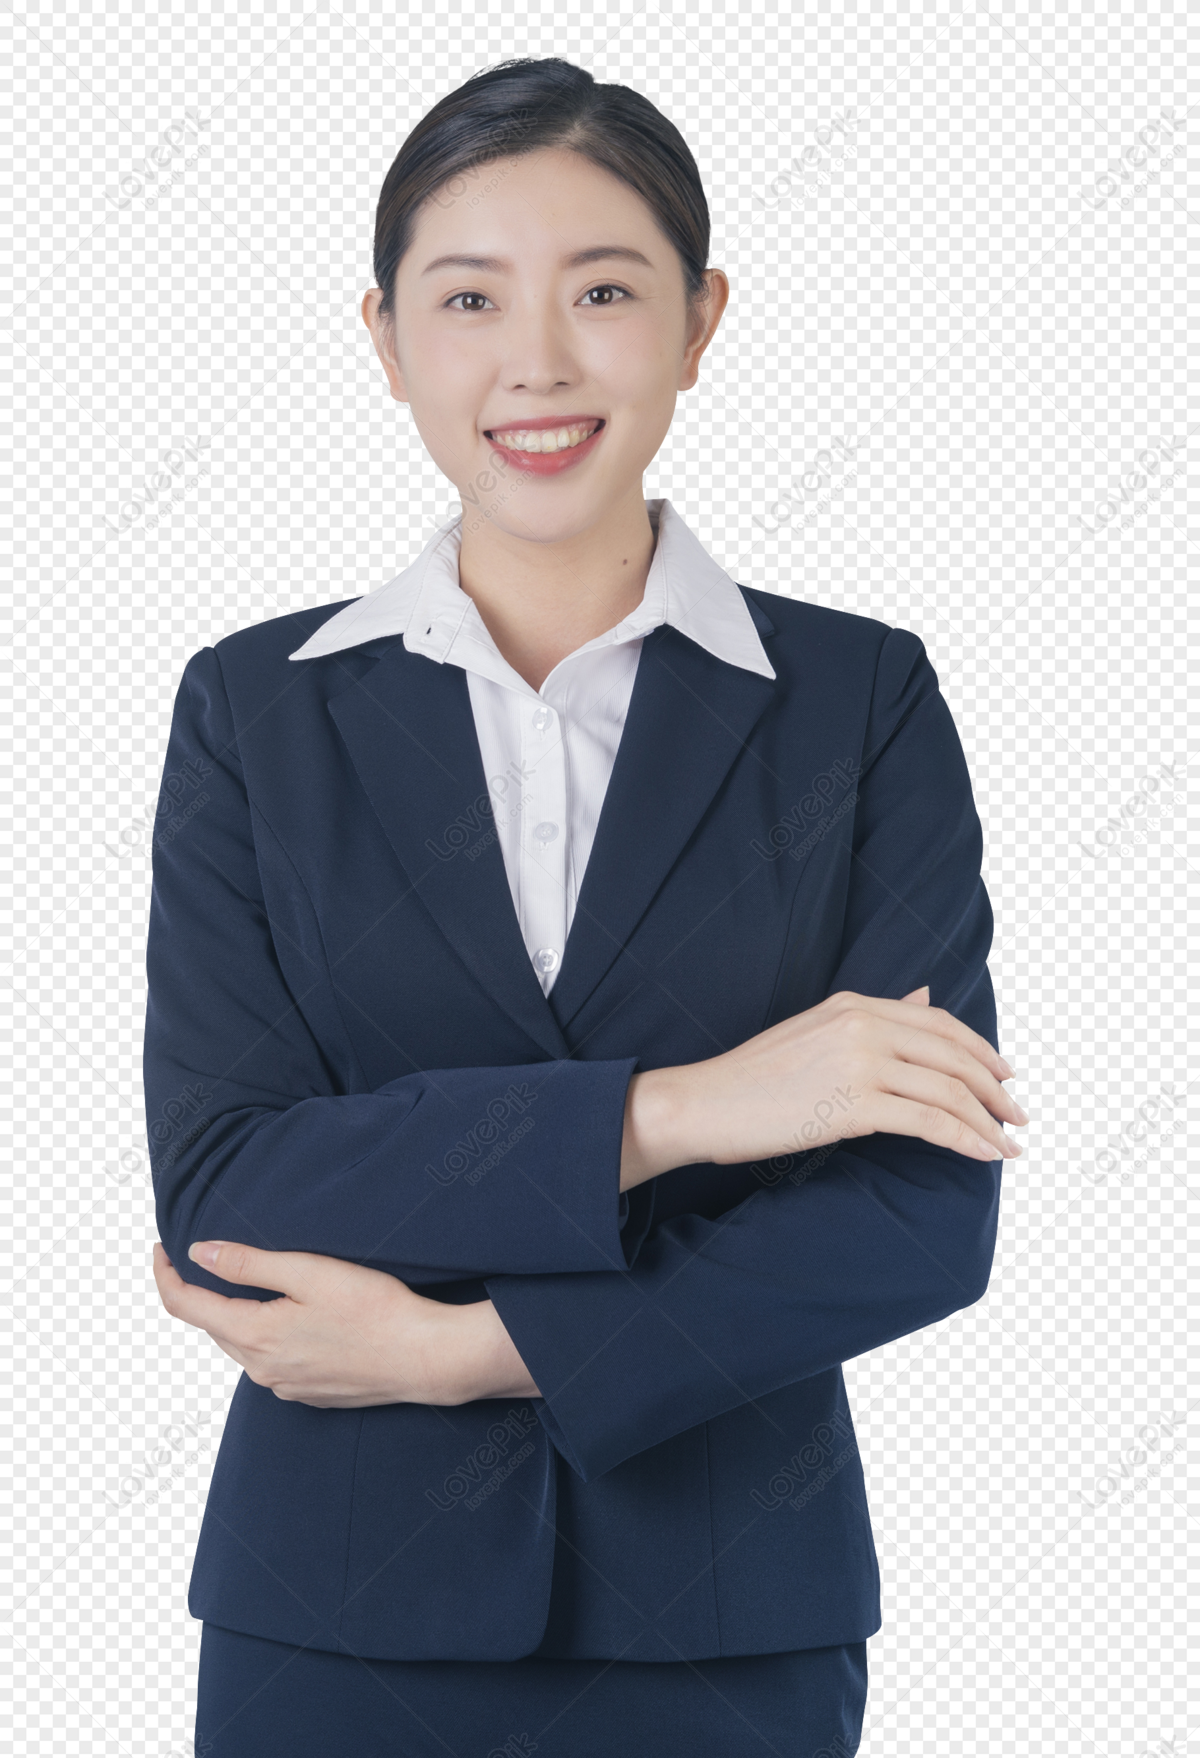 How to Choose Women's Suits for Business - Business Shirts Plus Blog